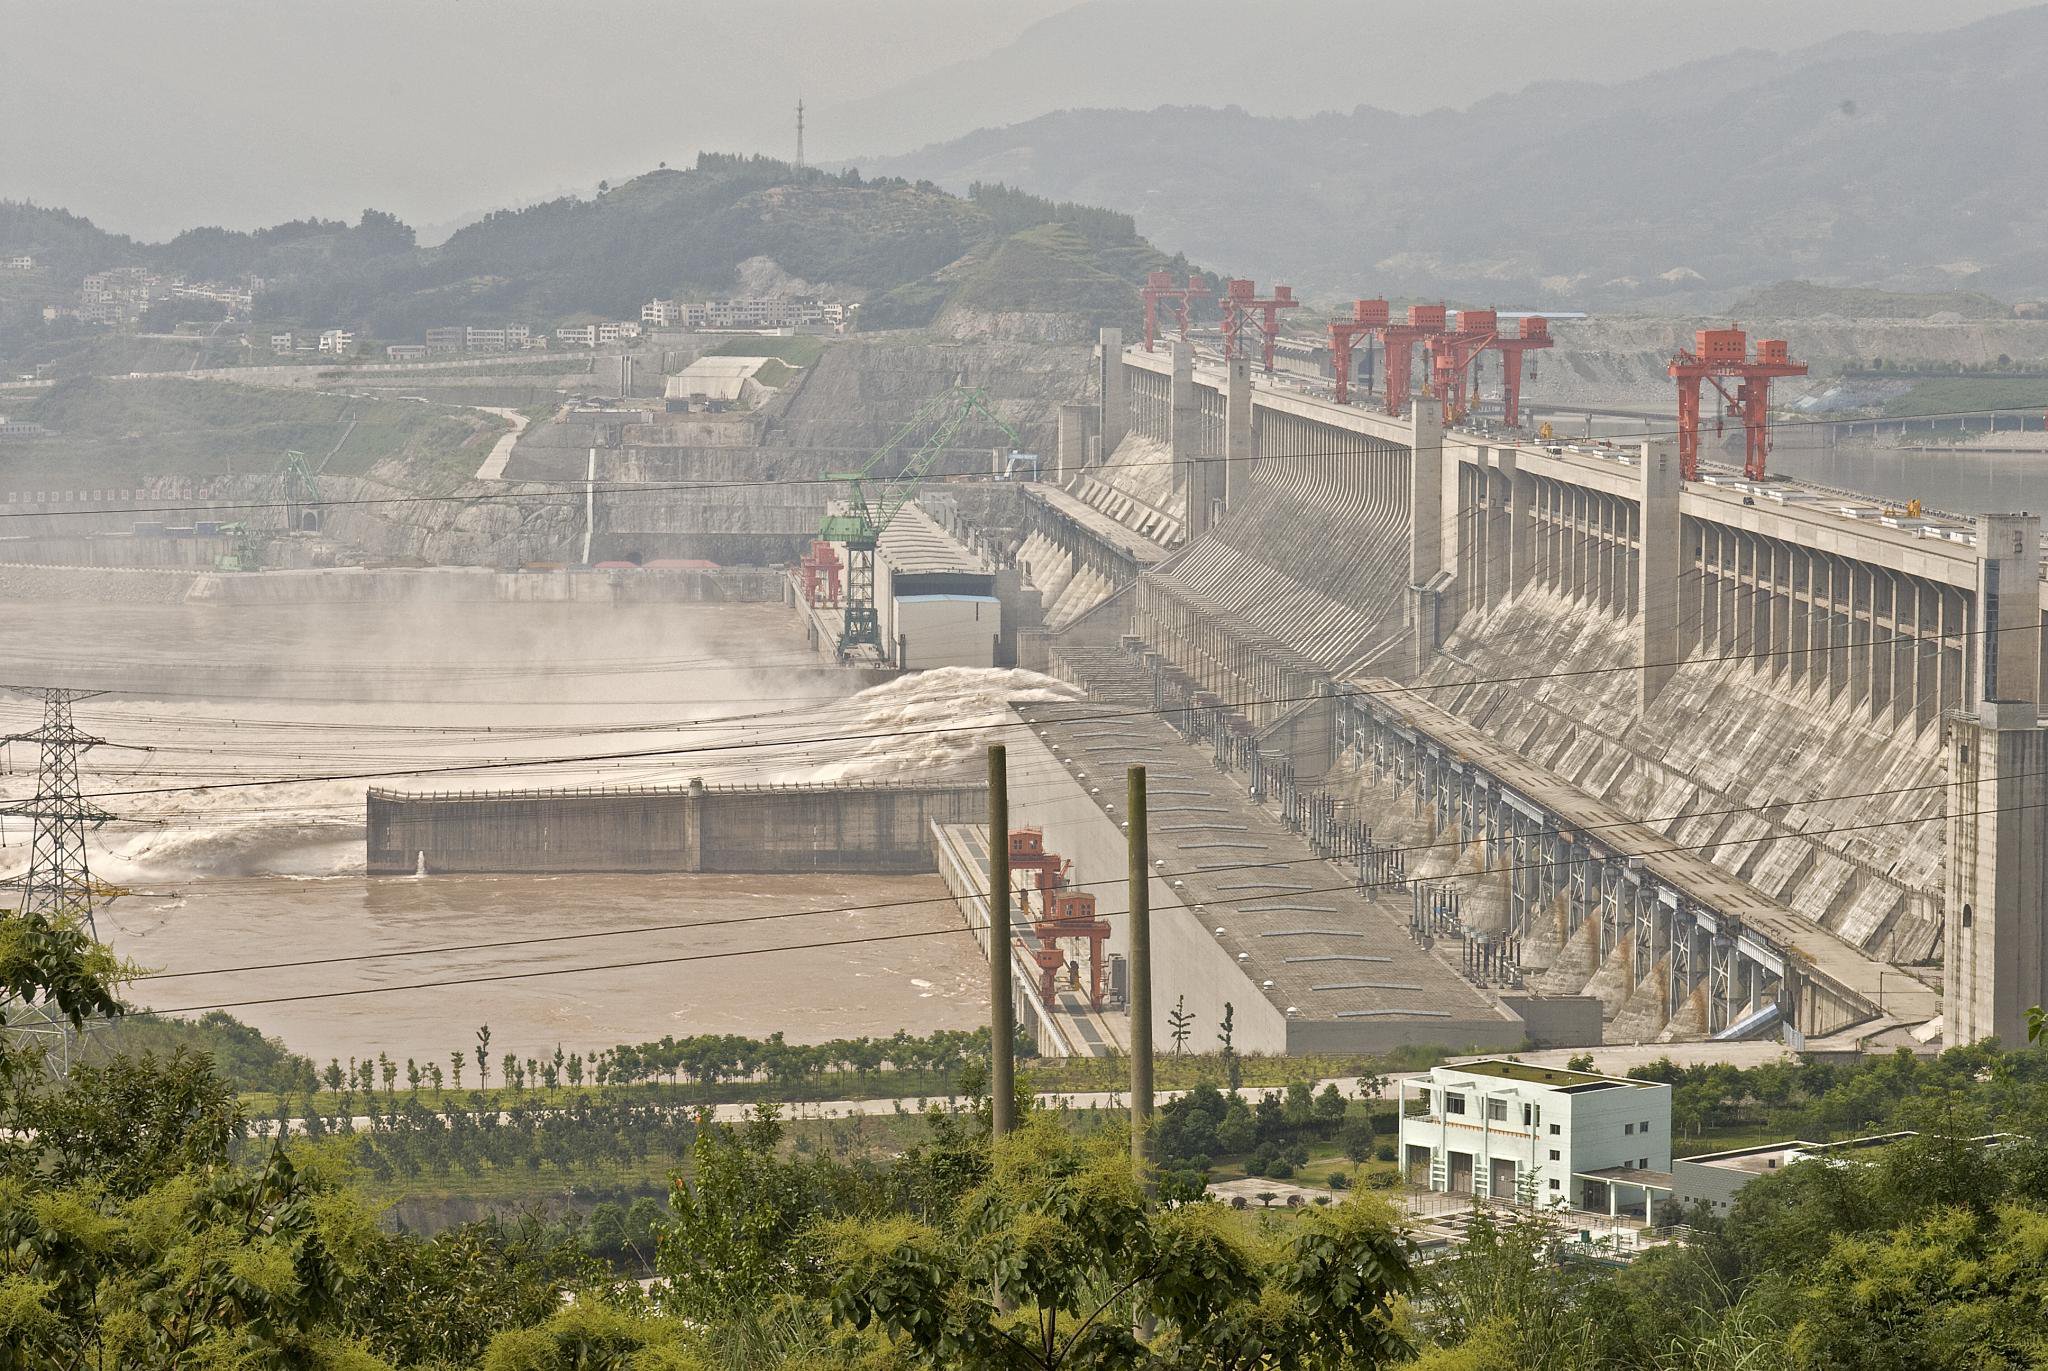 Image of the Three Gorges Dam in China, taken by Marshall Segal.